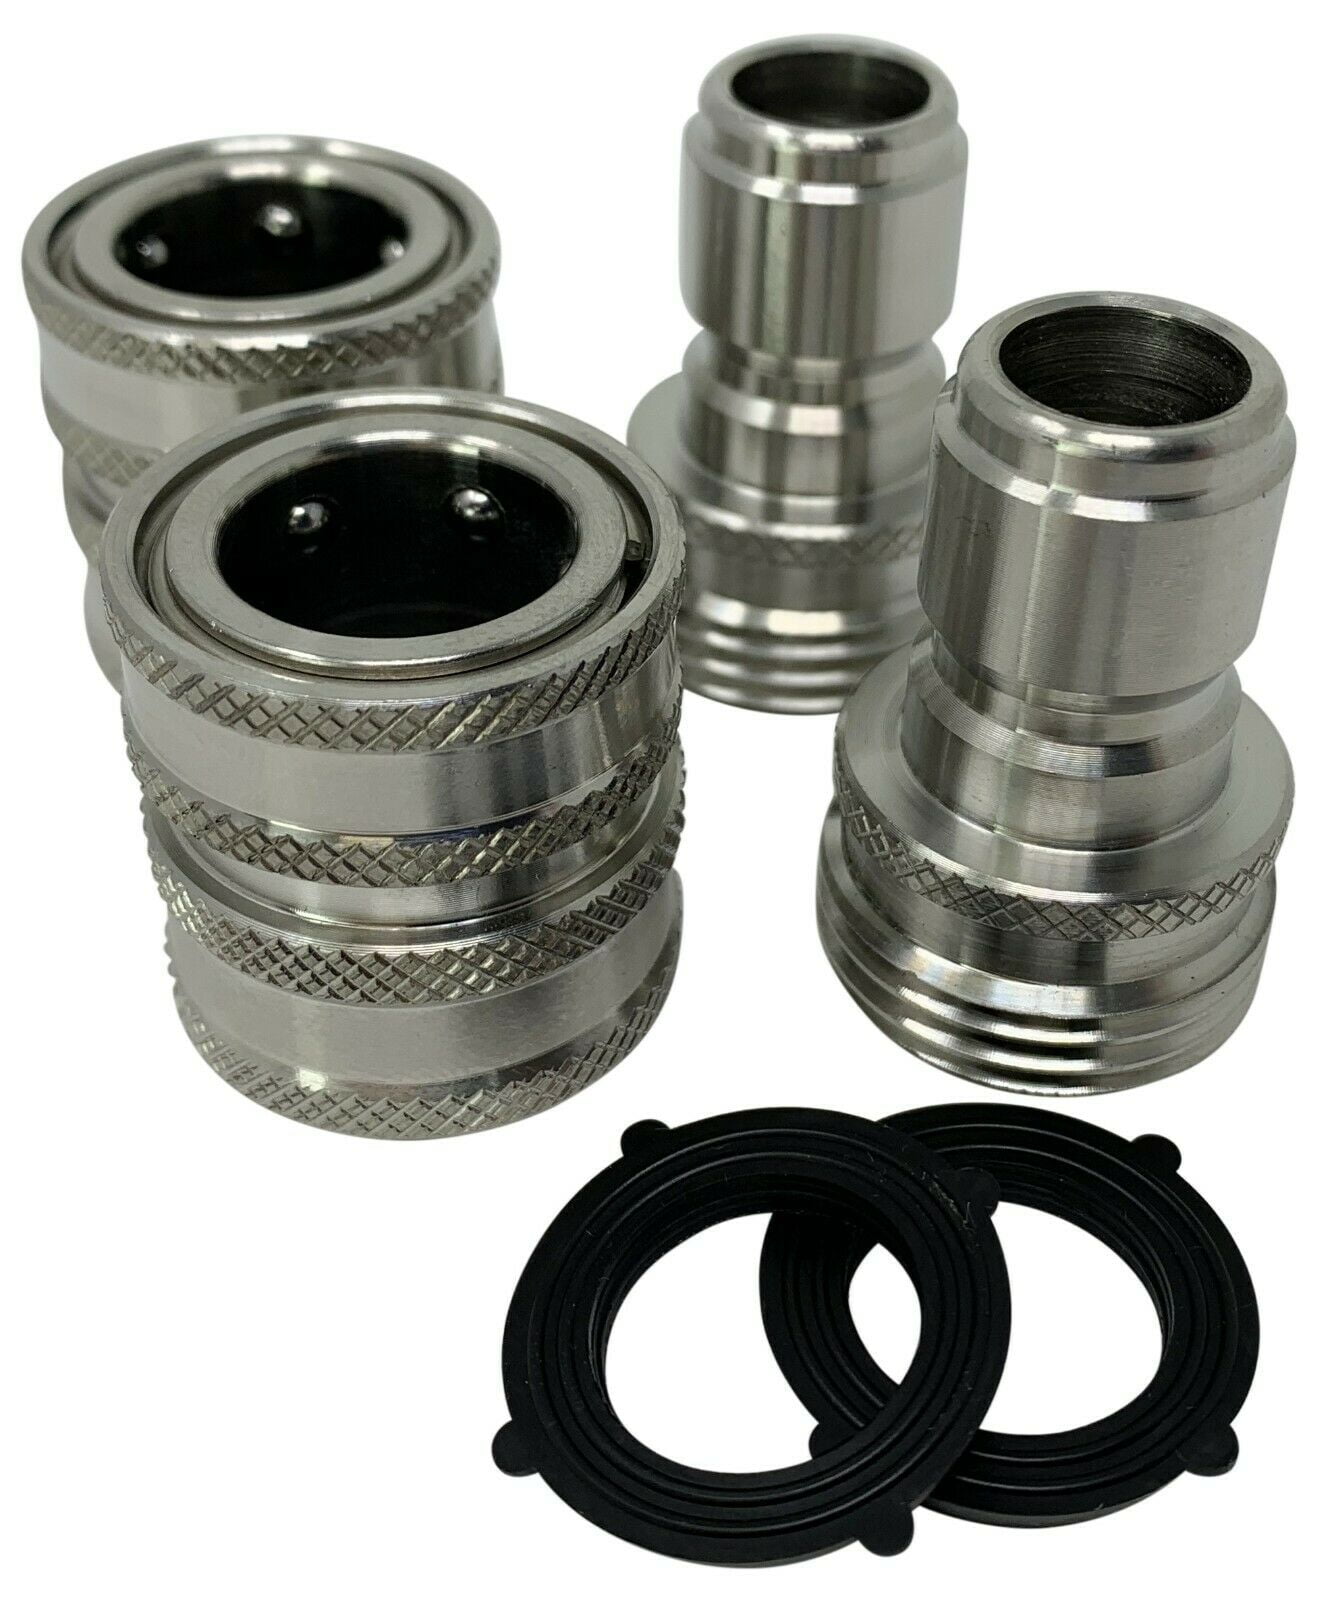 Hose Waterstop Connector 2 in 1 Threaded Tap Connector for 3/4 inch and 1/2 inch Hose including Hose End Quick Connector Garden Hose Connector Set Double Male Snap Connector Coupling